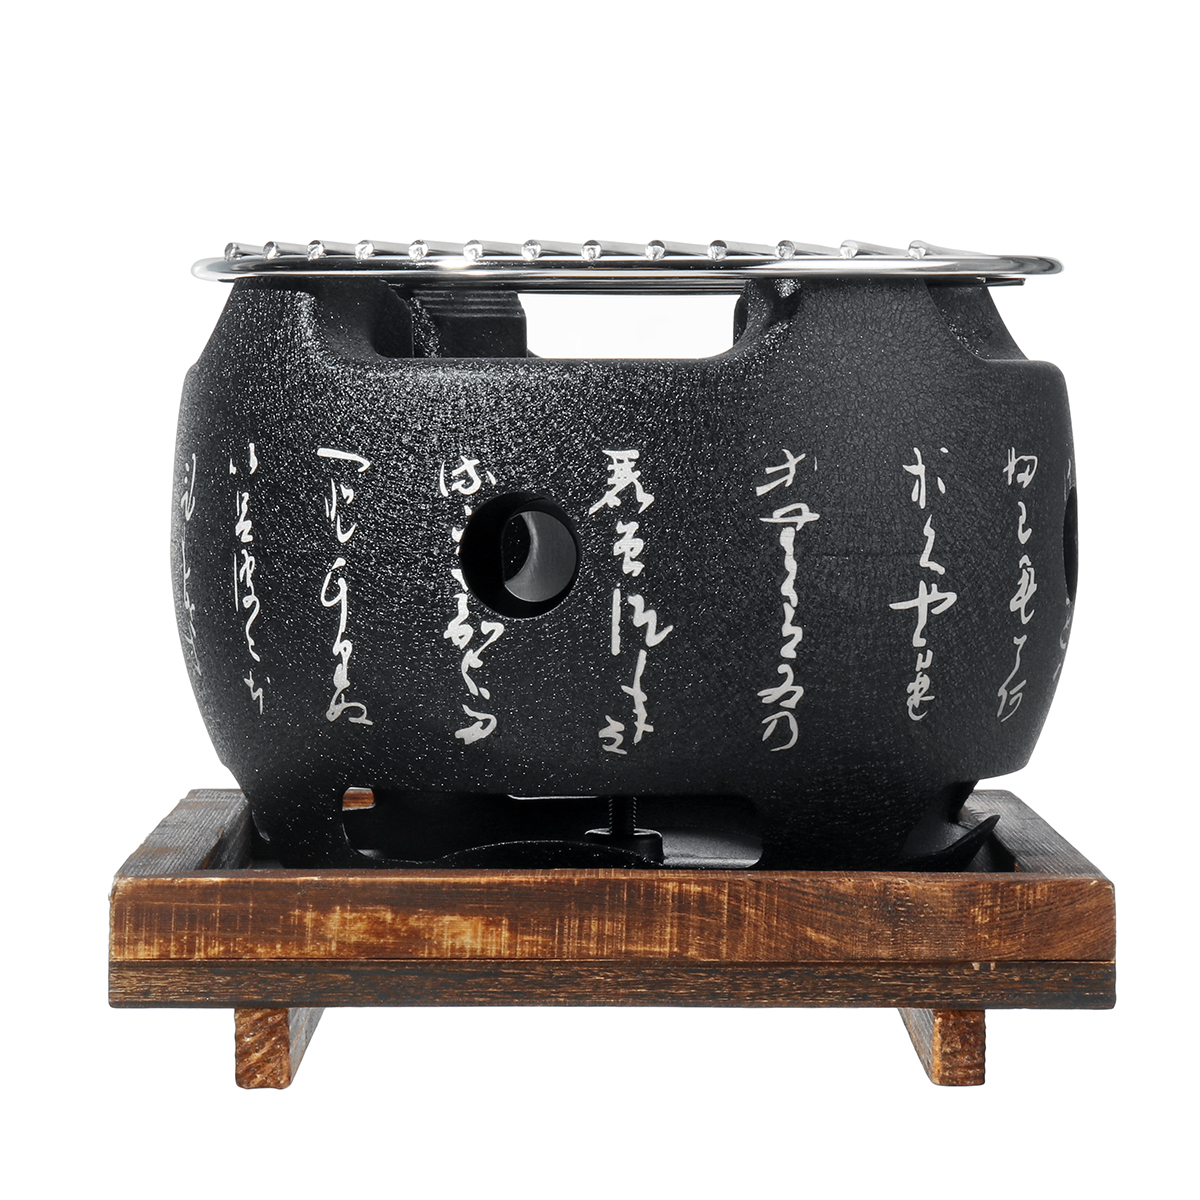 Table Top Outdoor BBQ Grill BBQ Grill Charcoal Grill Japanese Style - image 2 of 11